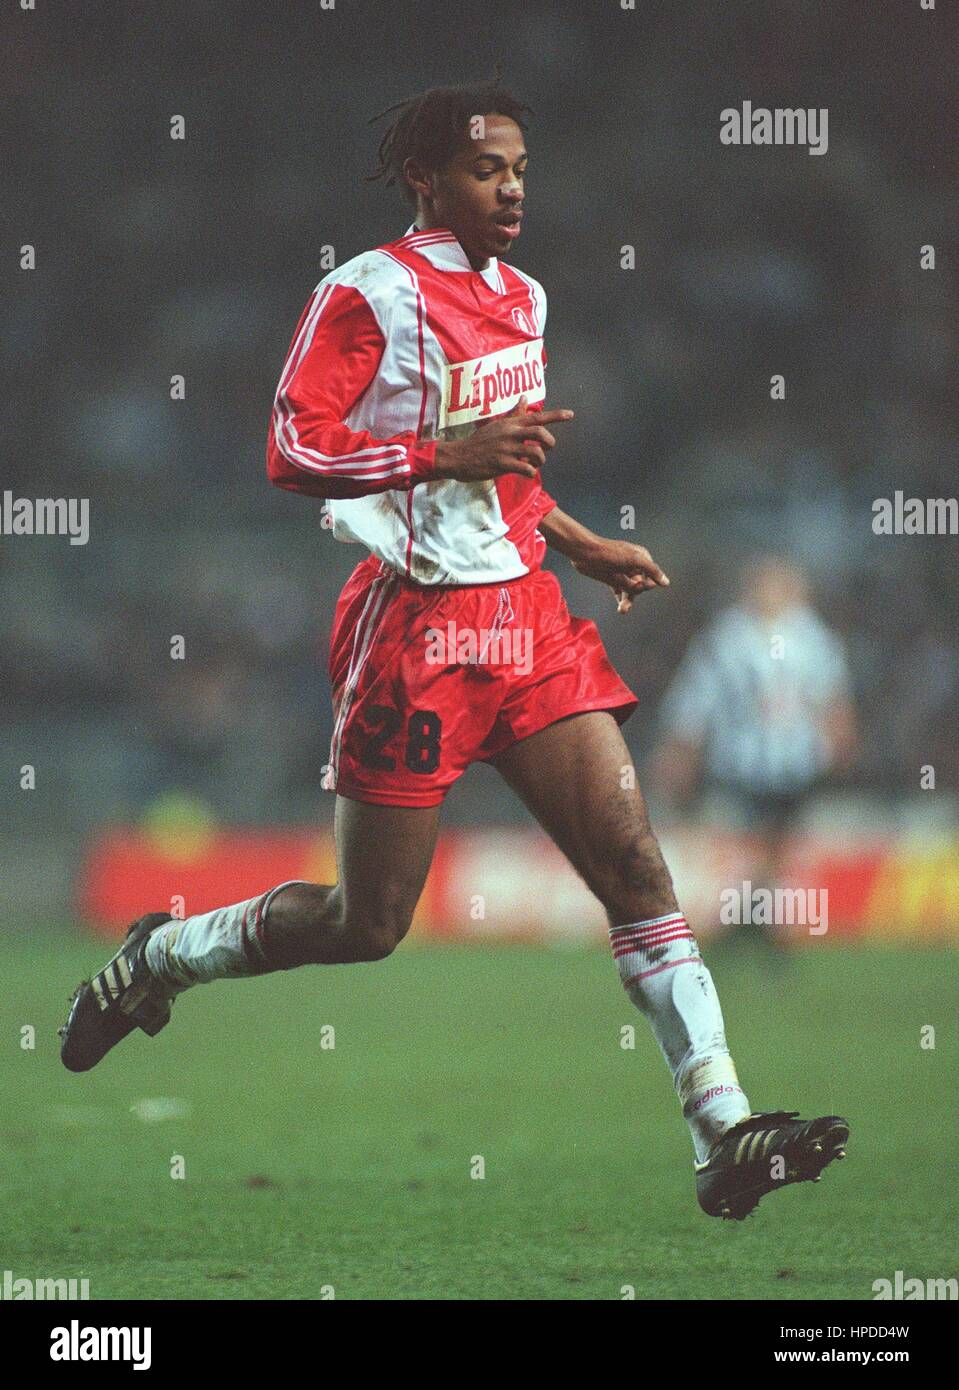 THIERRY HENRY AS MONACO 01 March 1997 Stock Photo - Alamy